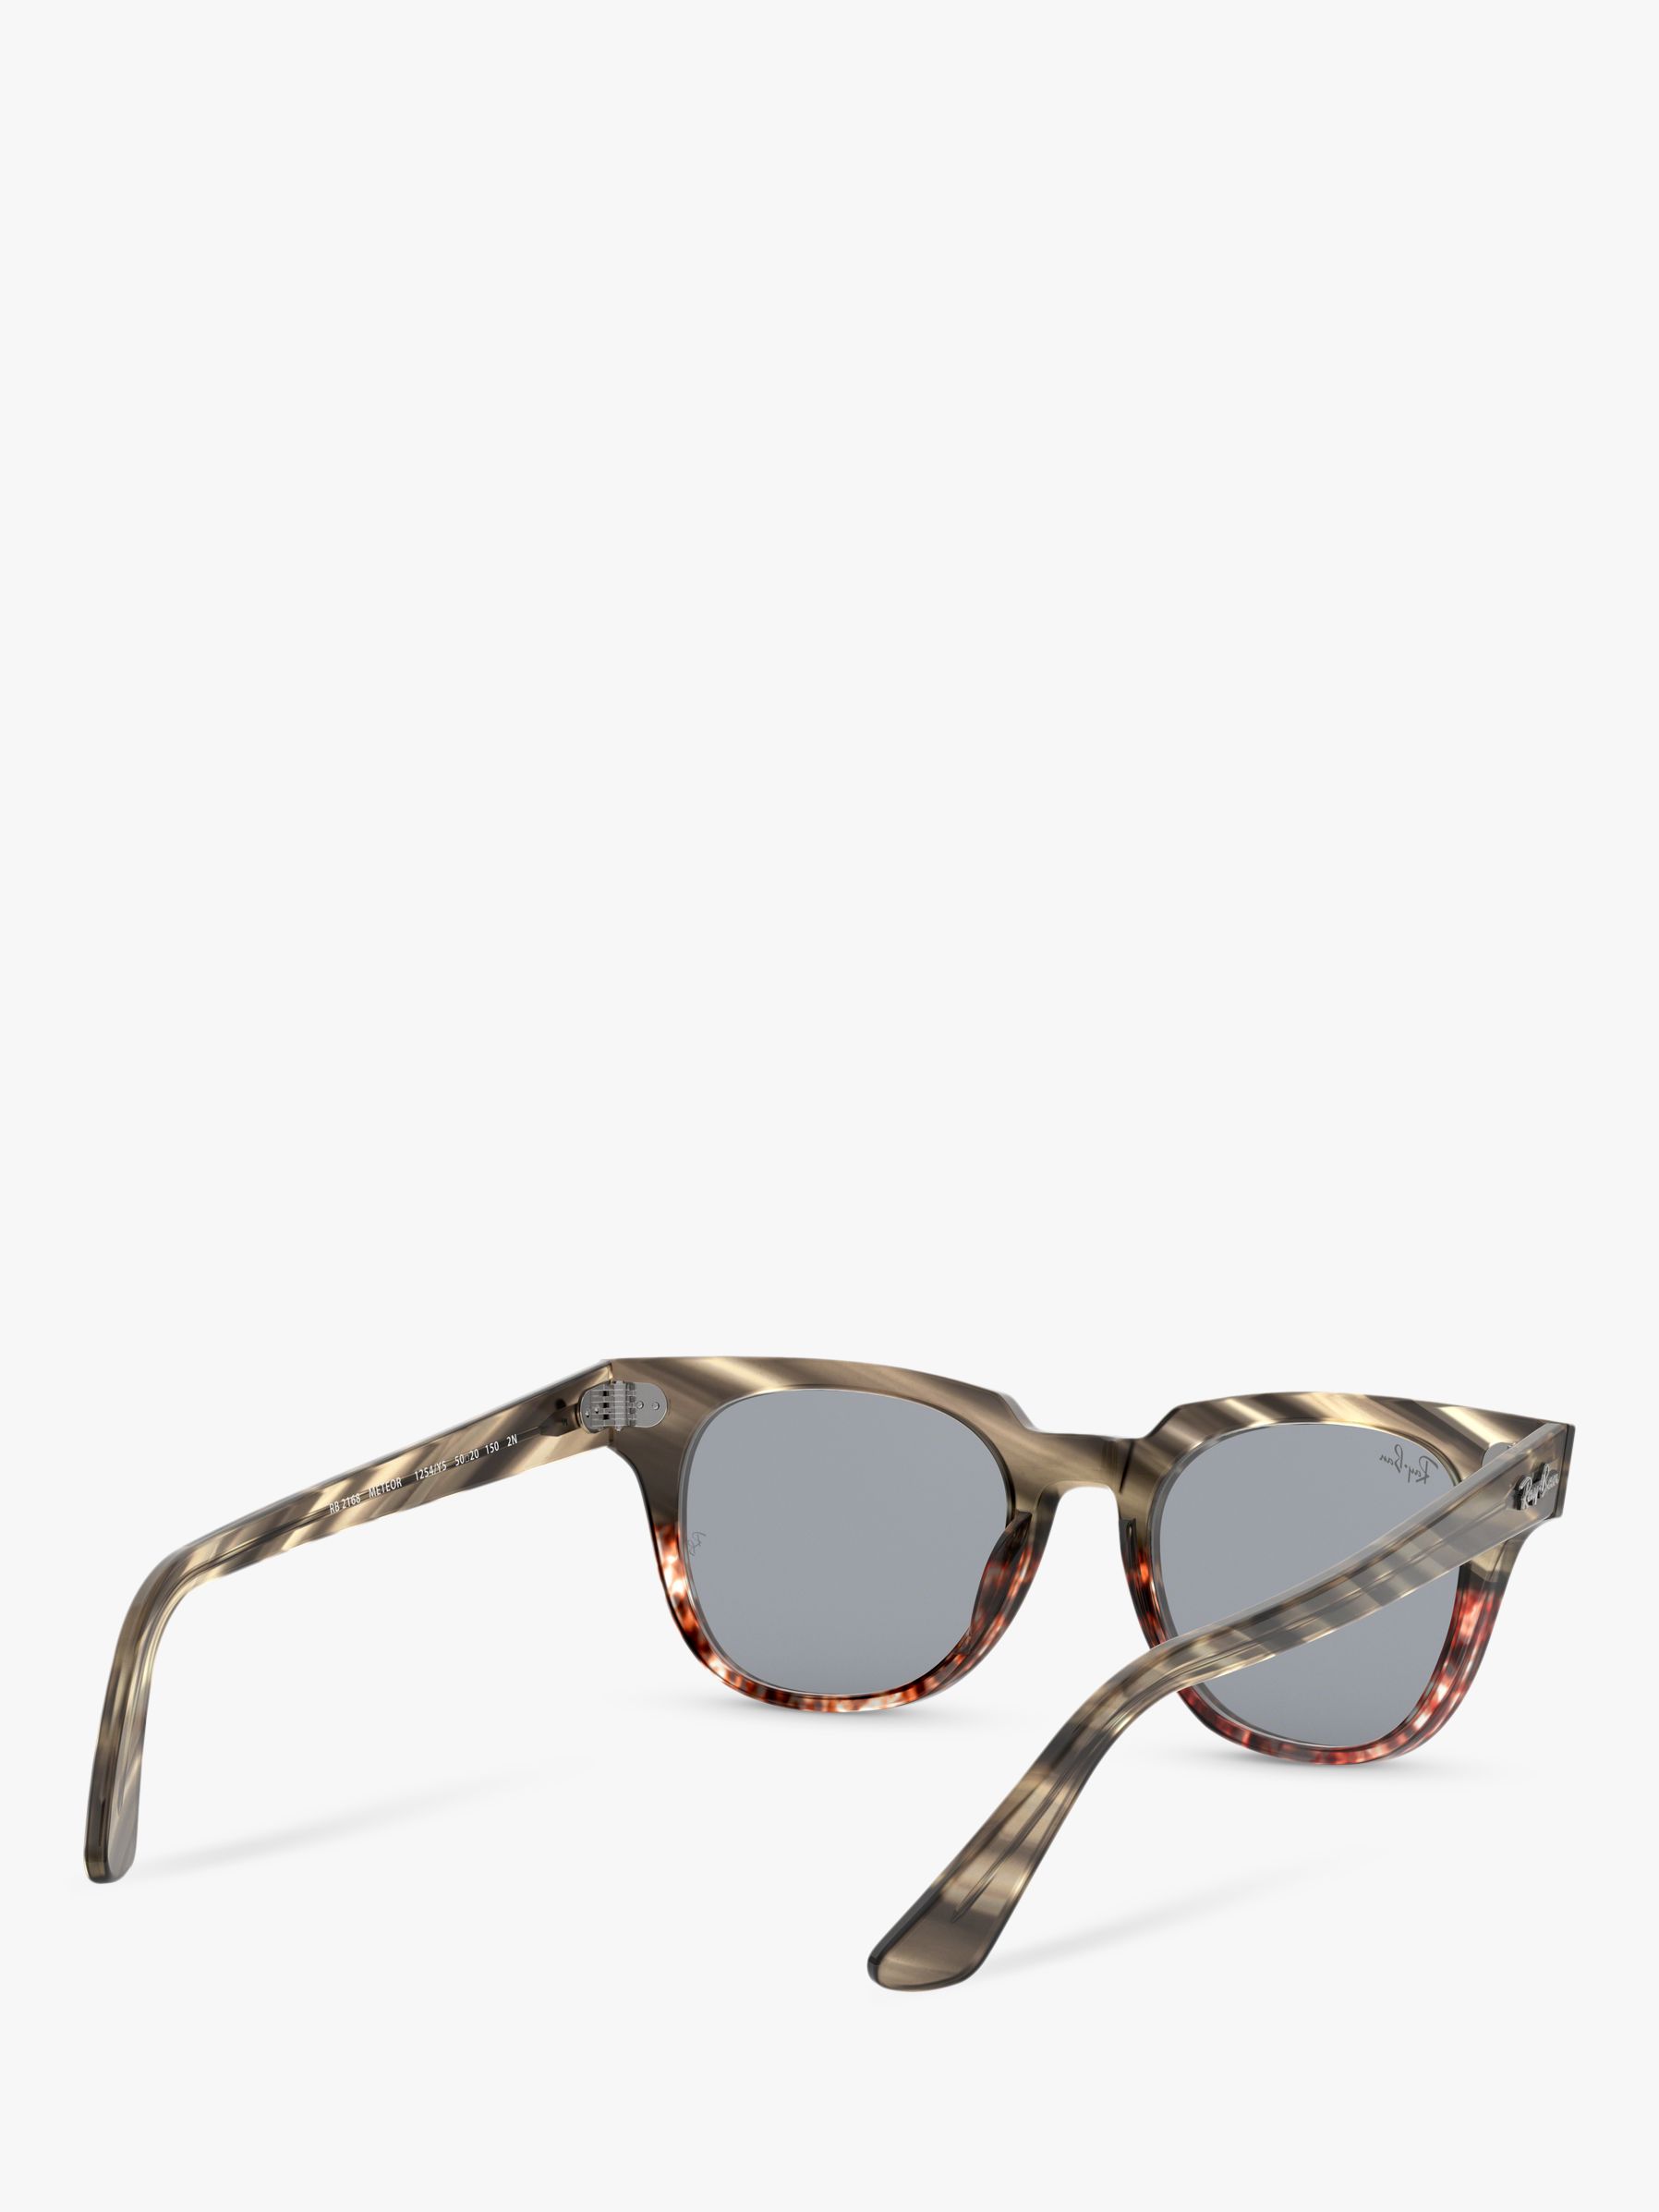 Ray Ban Rb2168 Unisex Square Sunglasses Brown Stripedgrey Gradient At John Lewis And Partners 9368